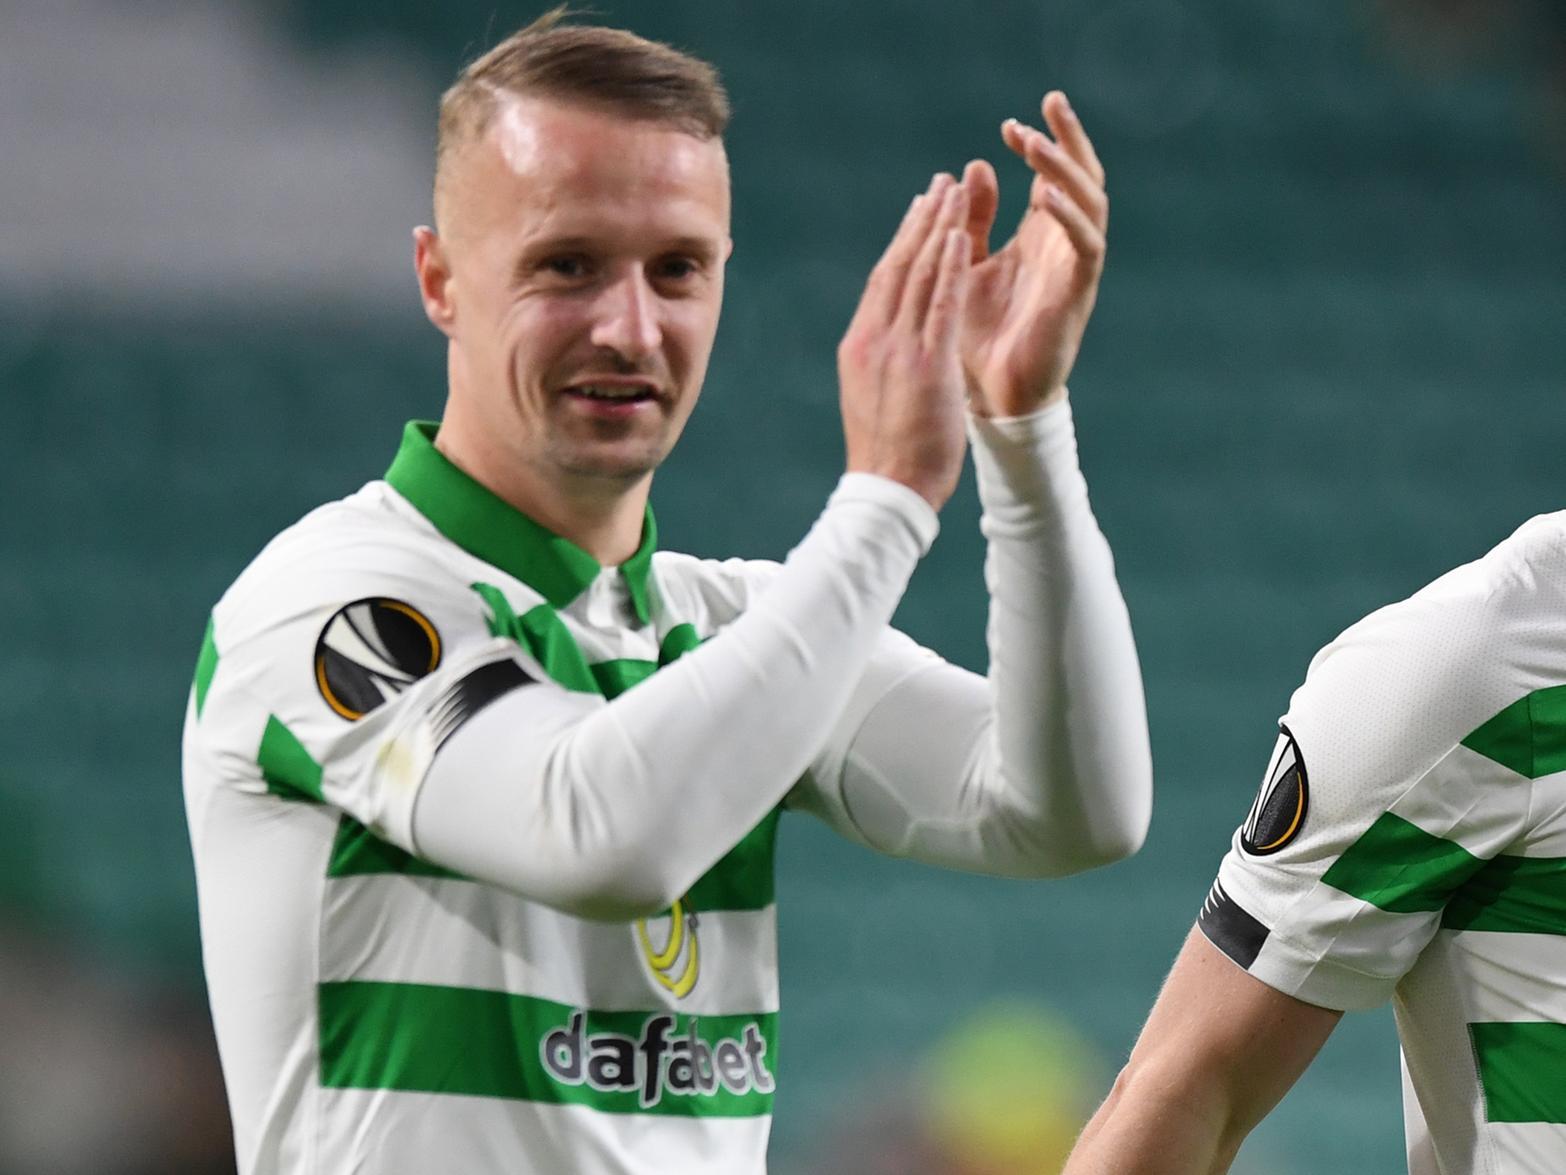 Amid reports of Leeds United's apparent interest in Celtic striker Leigh Griffiths, it has been claimed that the Hoops would require a bid in the region of 12m to sanction the Scotland international's sale. (Football Insider)